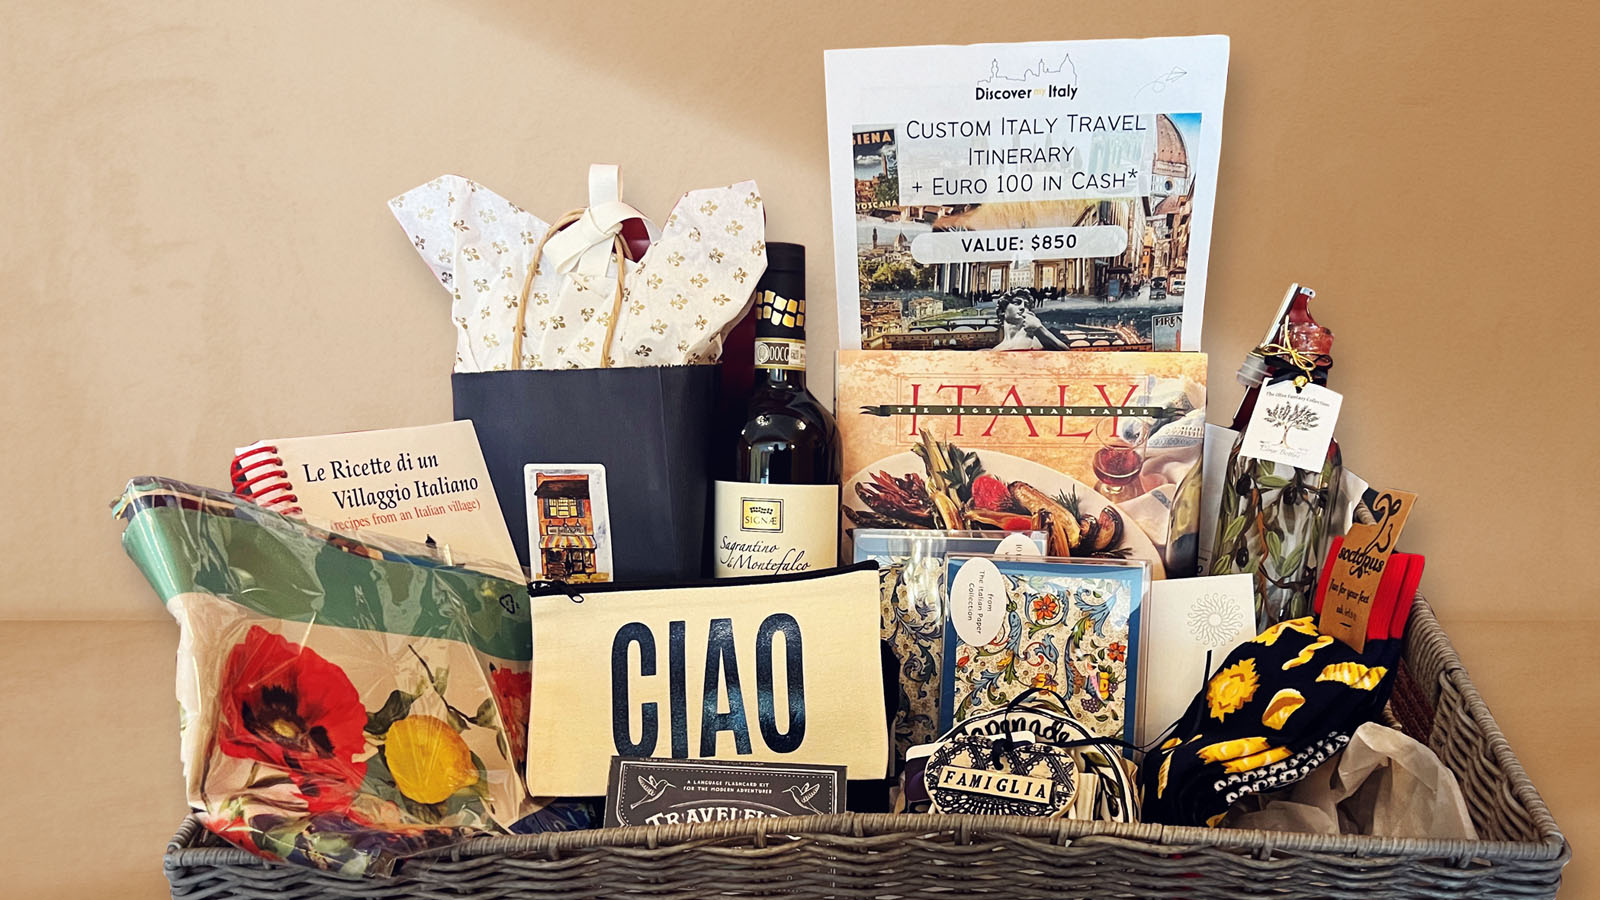 Photo of the 2nd prize basket filled with Italian themed treats, staycations experiences 